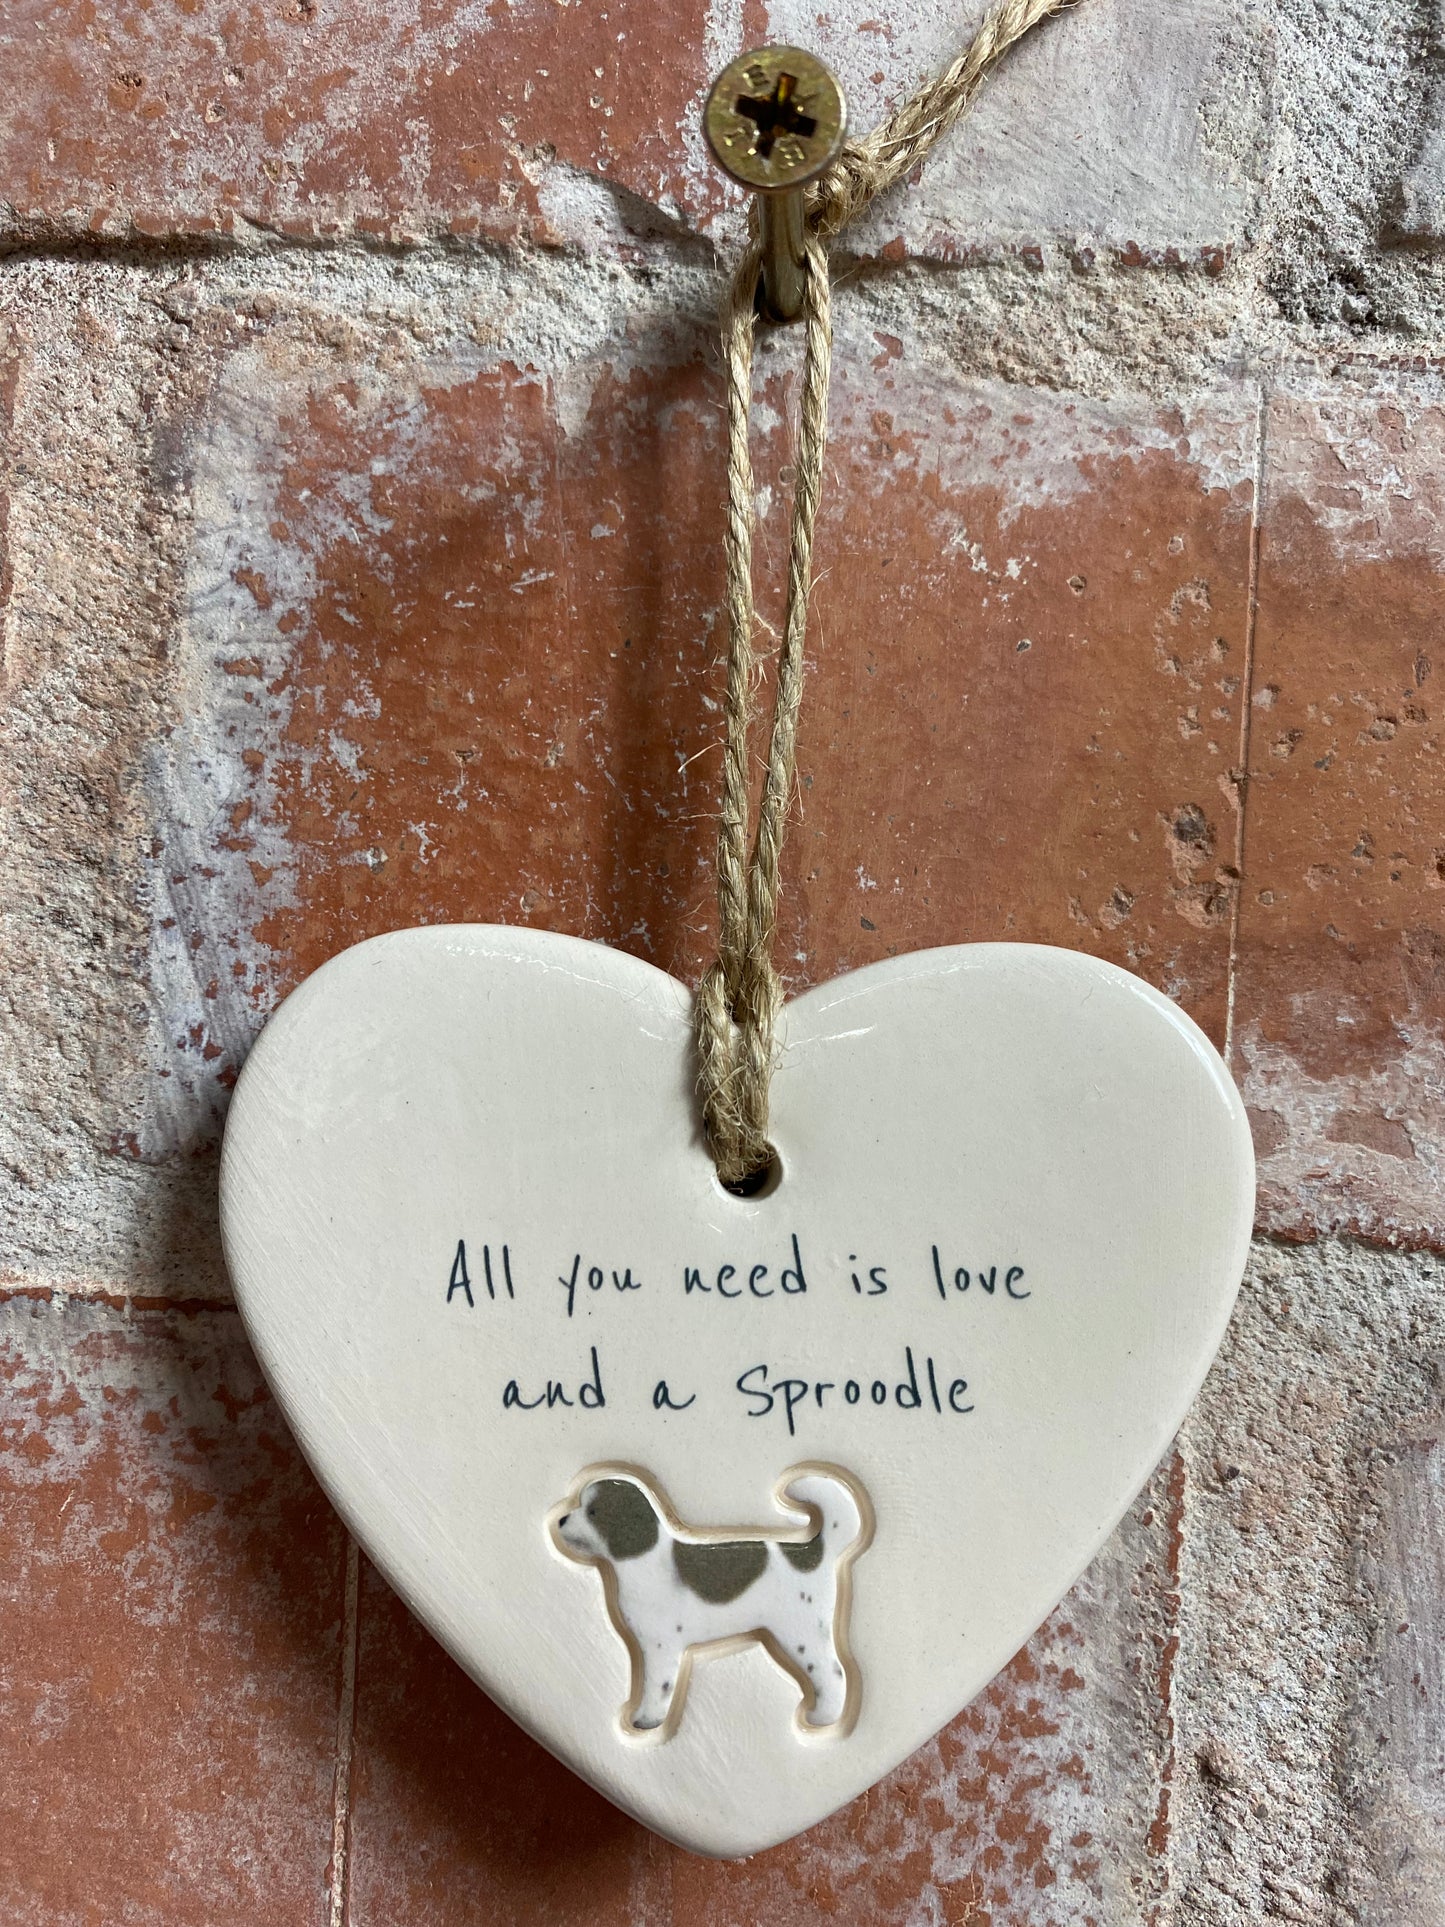 Sproodle ceramic heart